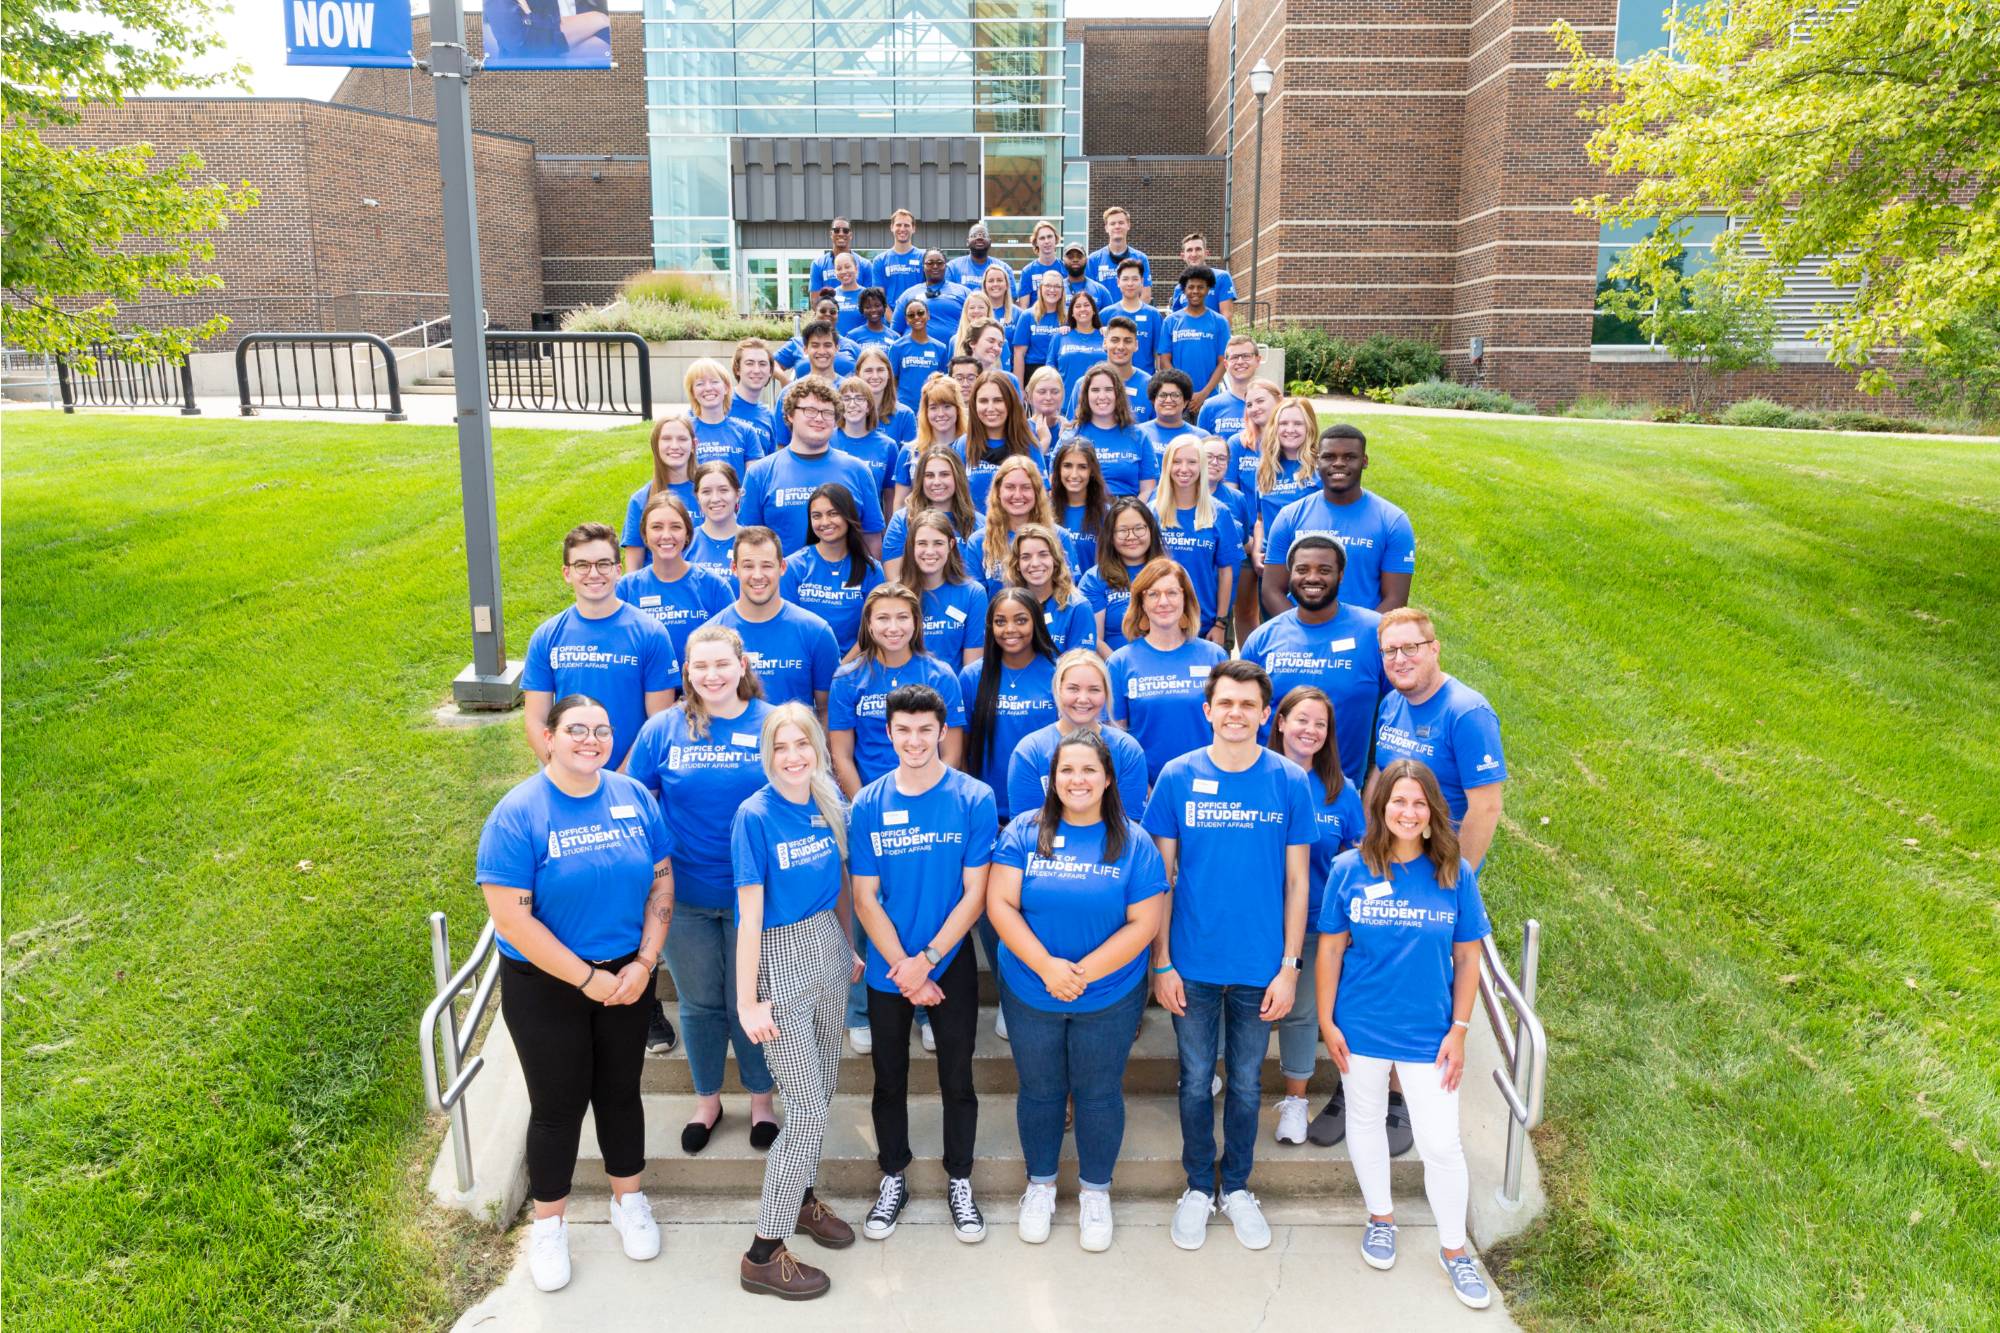 A group photo of the Office of Student Life staff.